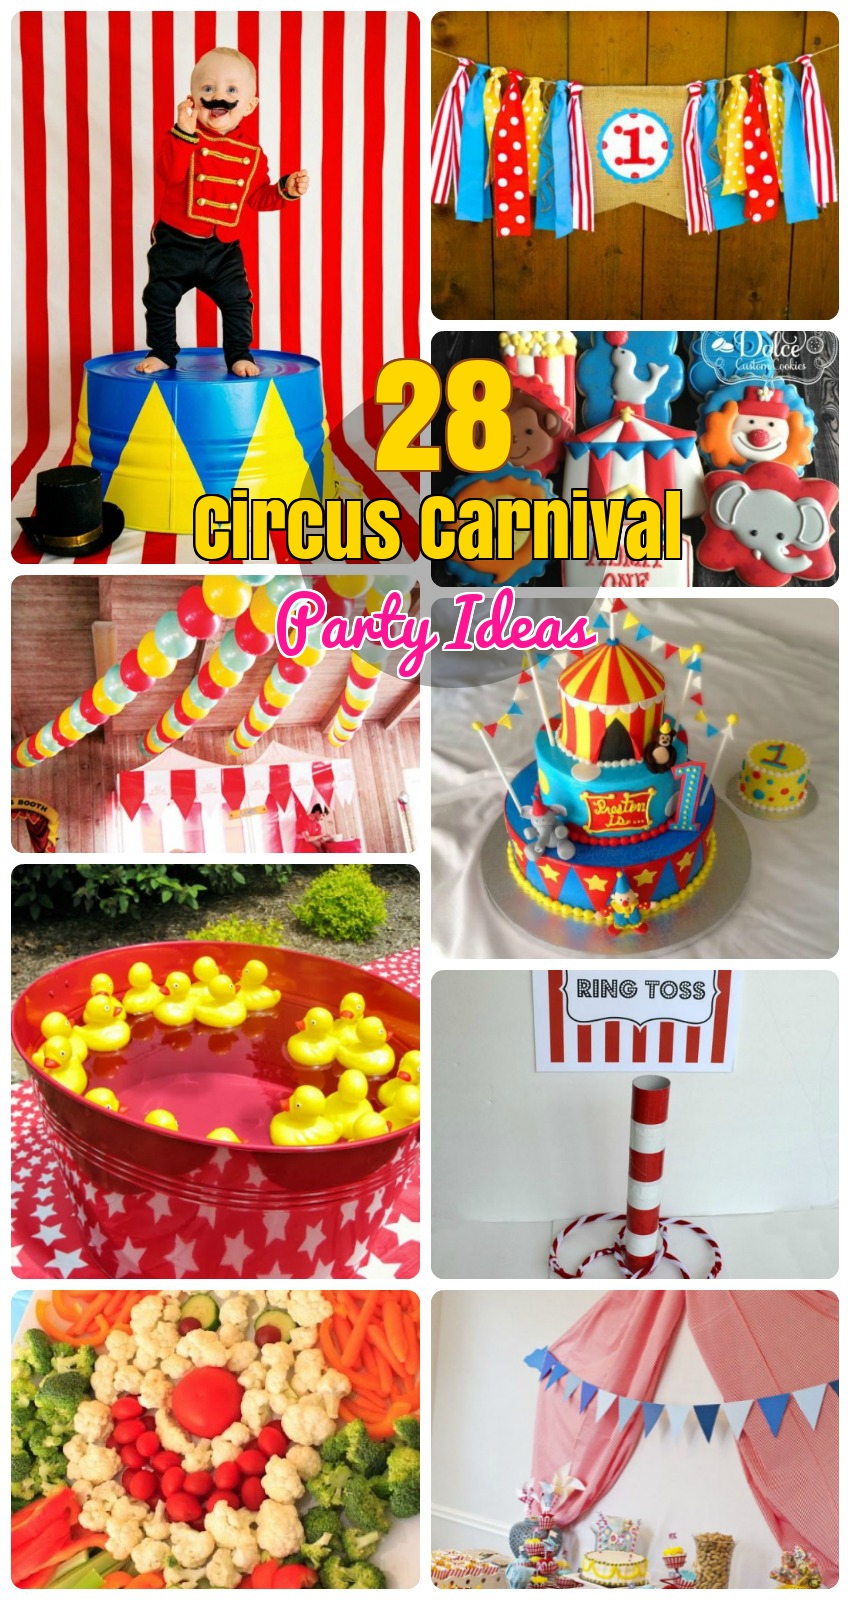 28 Circus Carnival Themed Birthday Party Ideas for Kids - Diy Craft